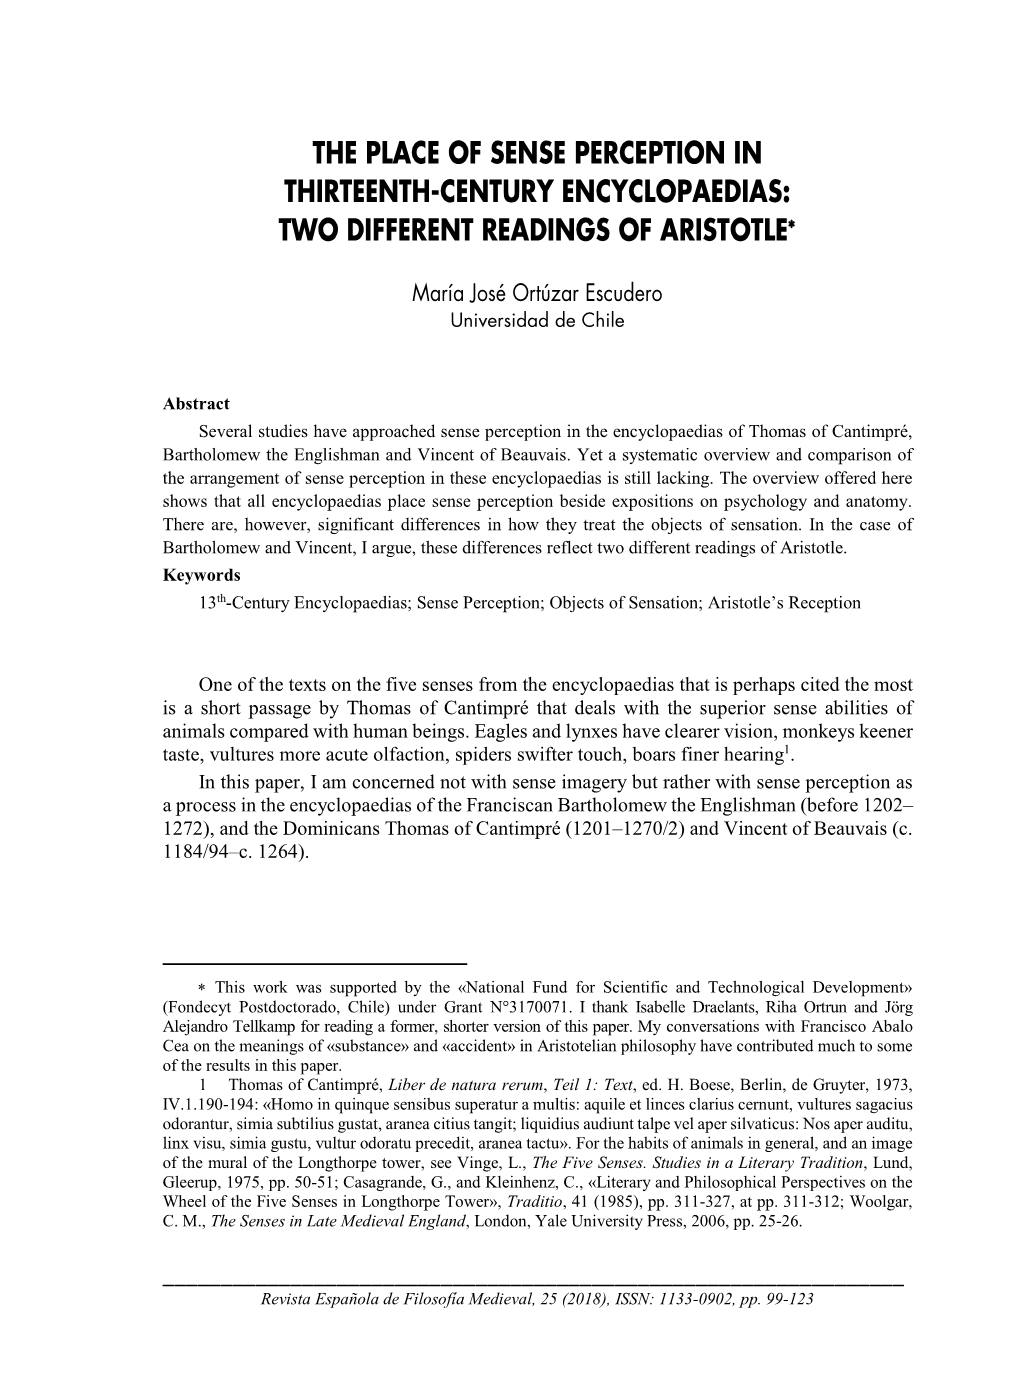 The Place of Sense Perception in Thirteenth-Century Encyclopaedias: Two Different Readings of Aristotle∗